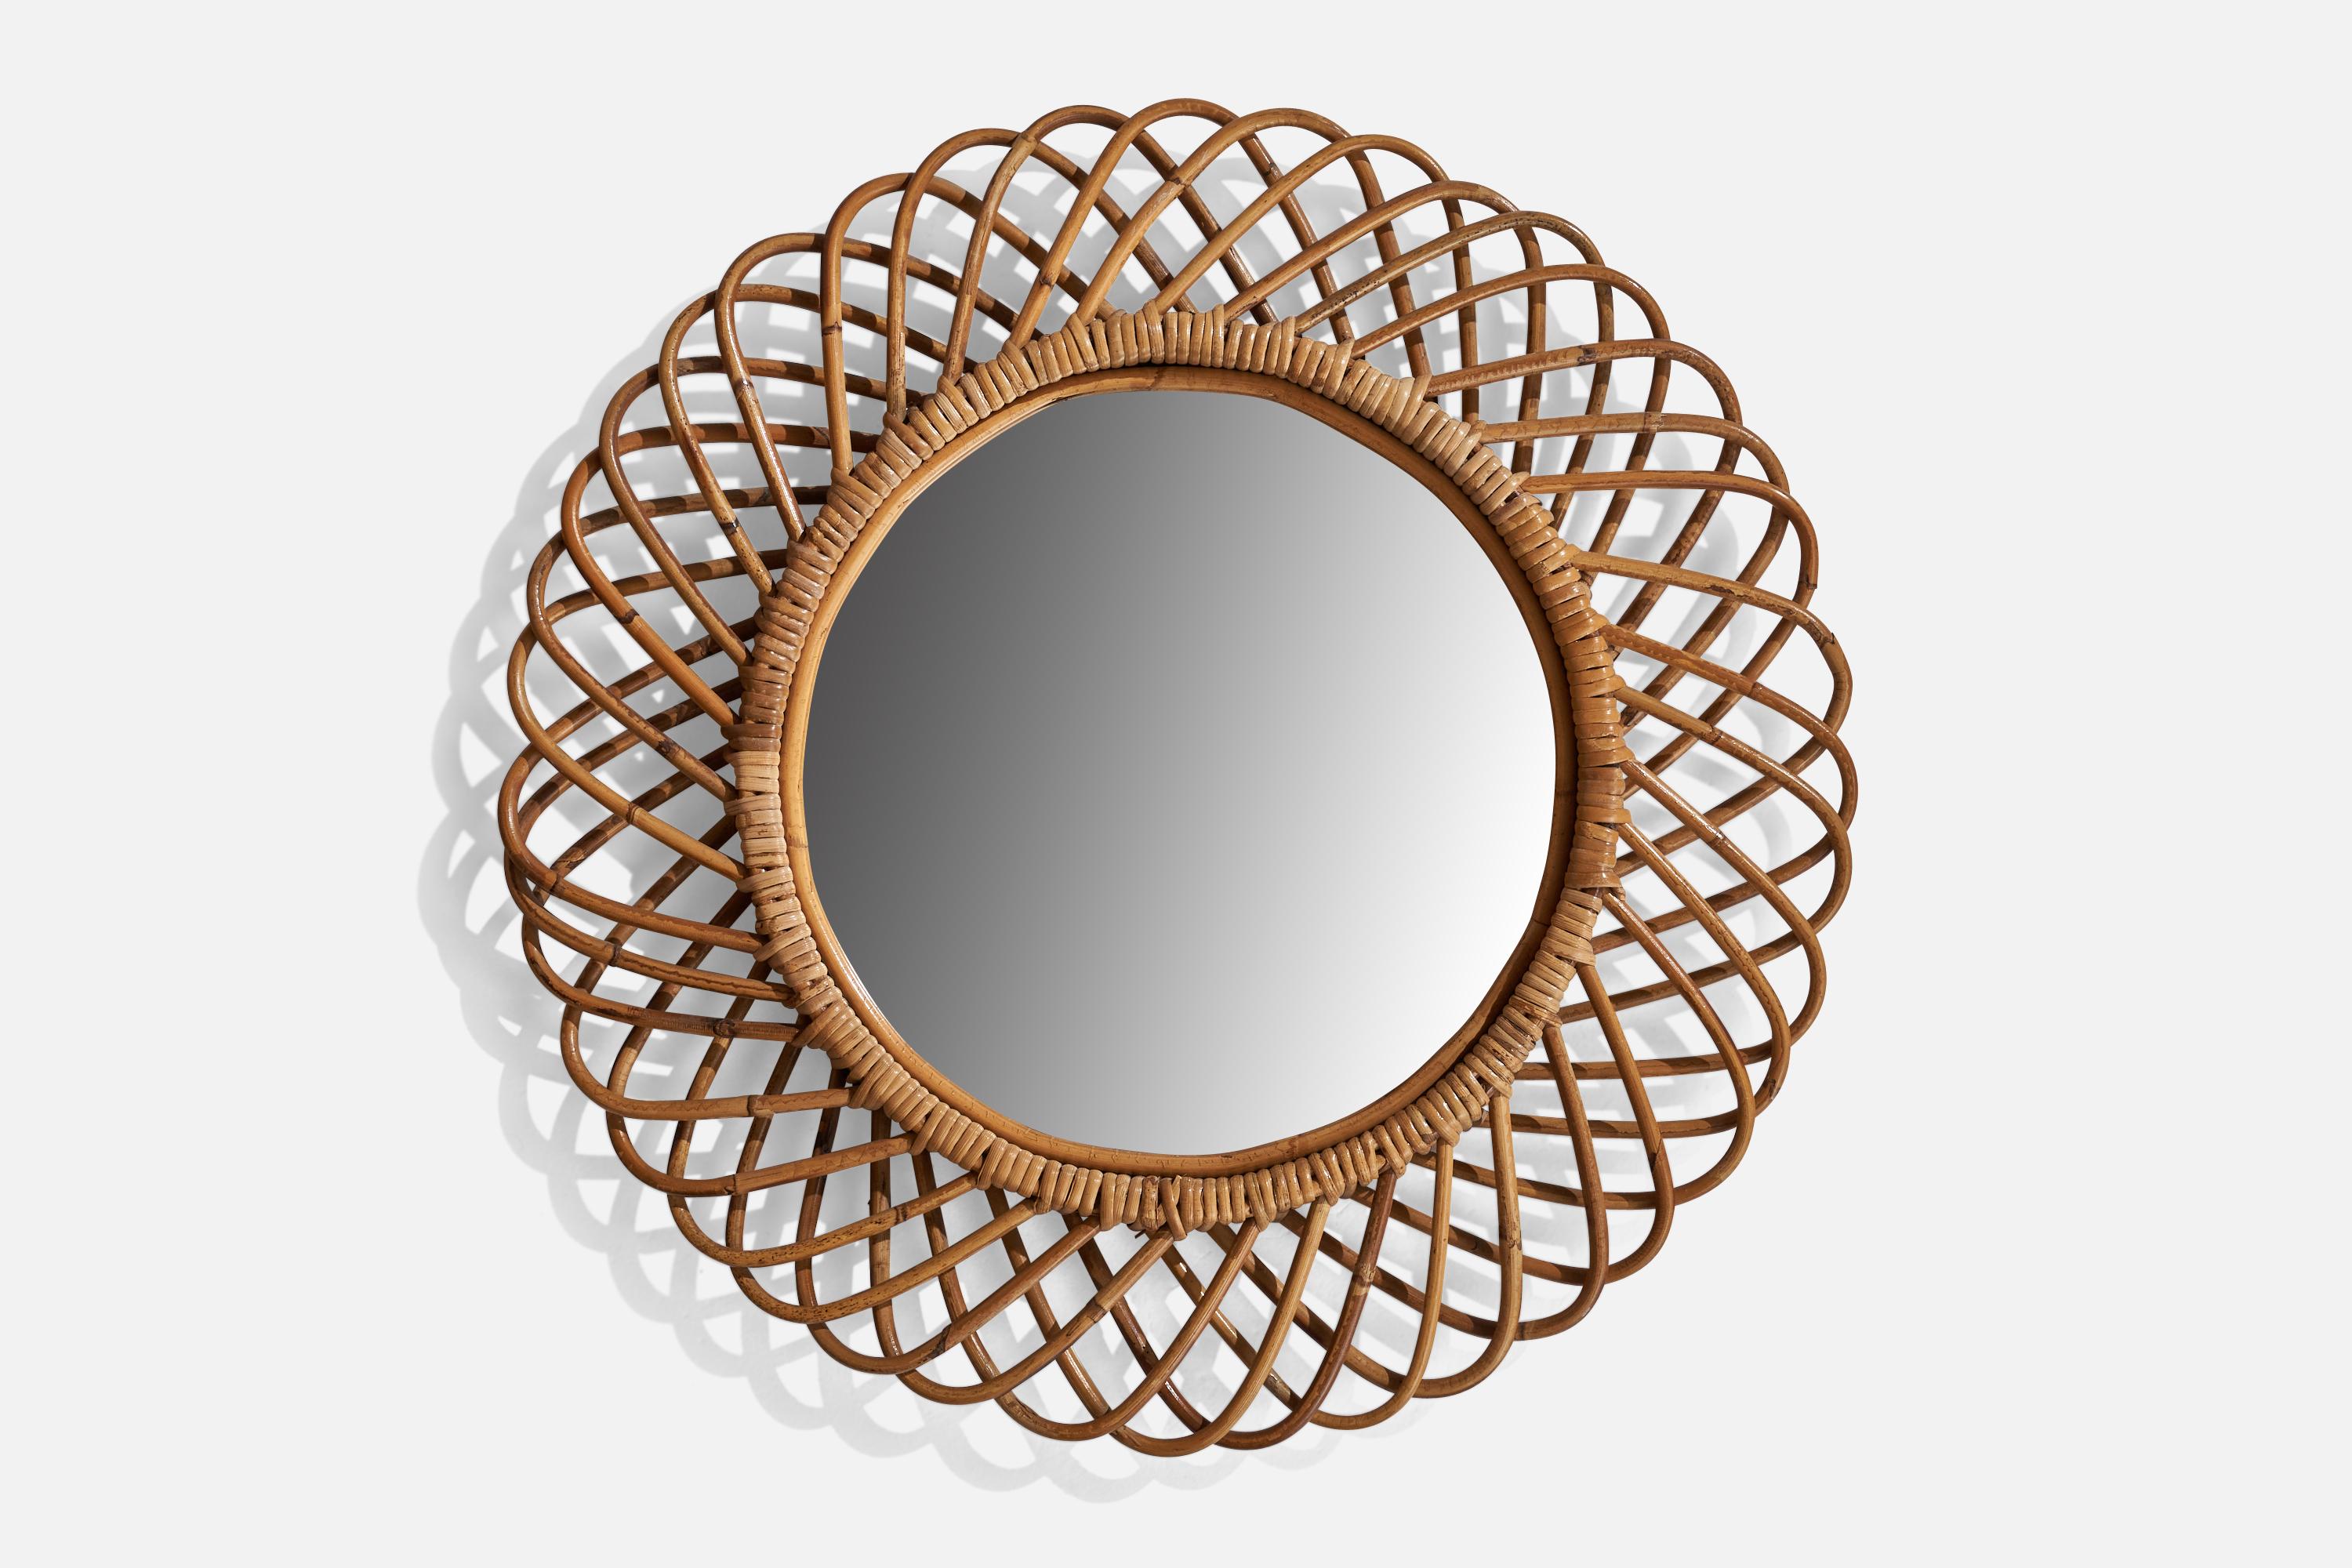 A rattan wall mirror designed and produced in Italy, 1960s.